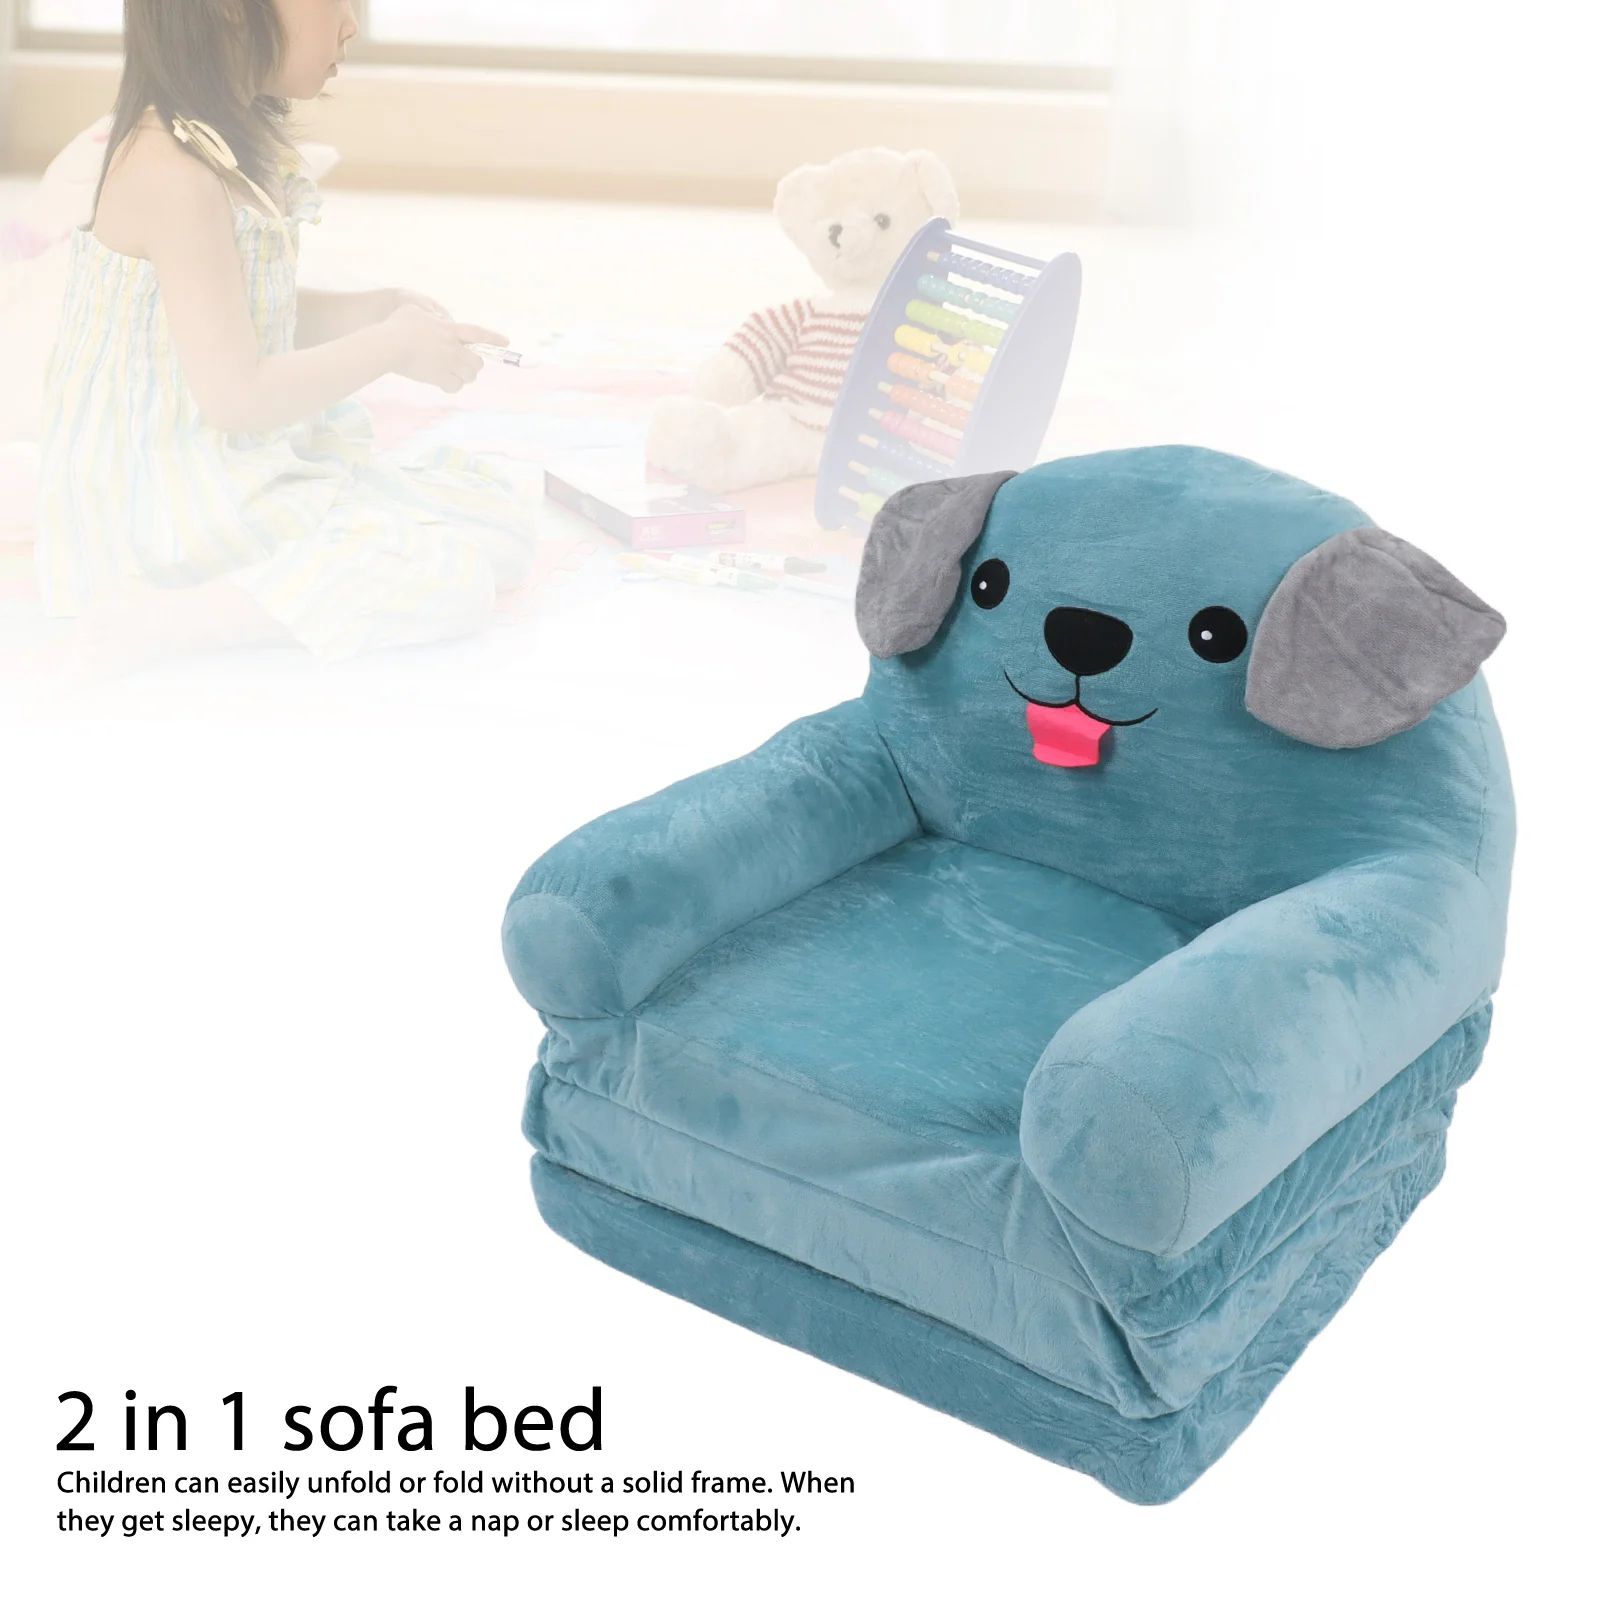 Children Sofa Blue Puppy Children'S Sofa Cute Cartoon Folding Small Sofa Bed  Dual Use Child Bean Bag For Kids – Aliexpress Intended For 2 In 1 Foldable Children'S Sofa Beds (View 8 of 15)